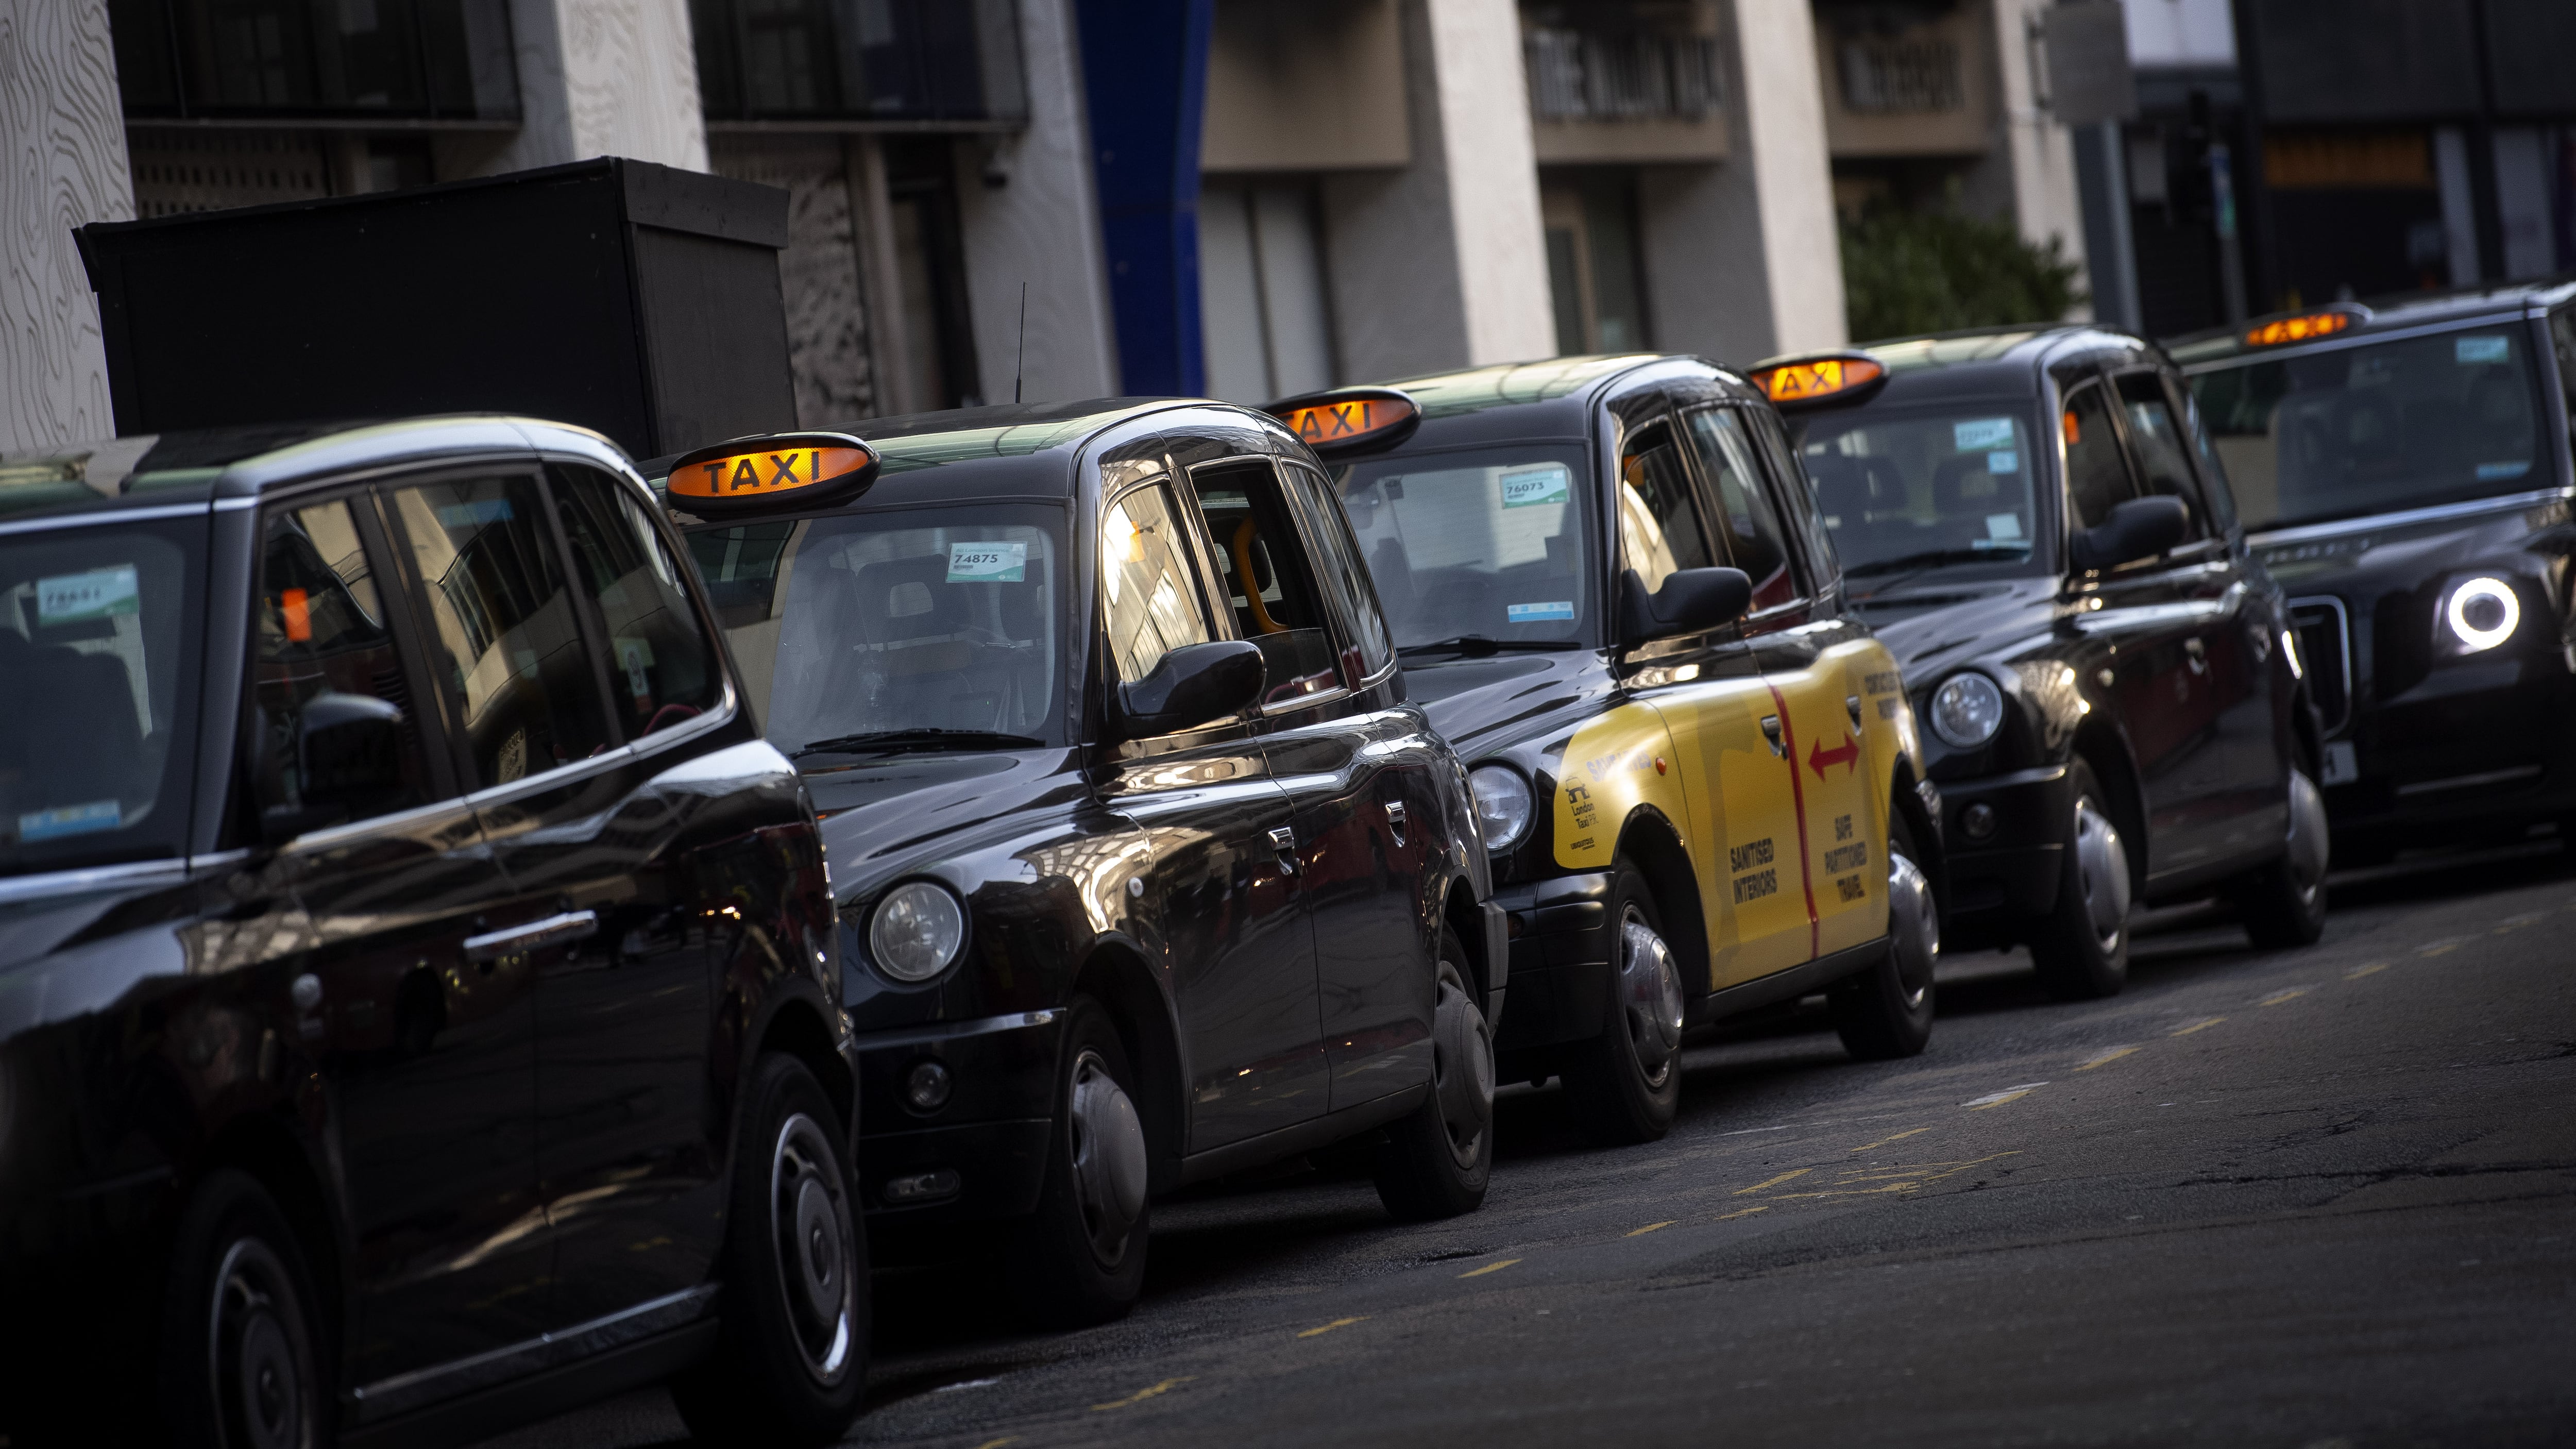 A group of more than 10,000 black cab drivers is suing Uber